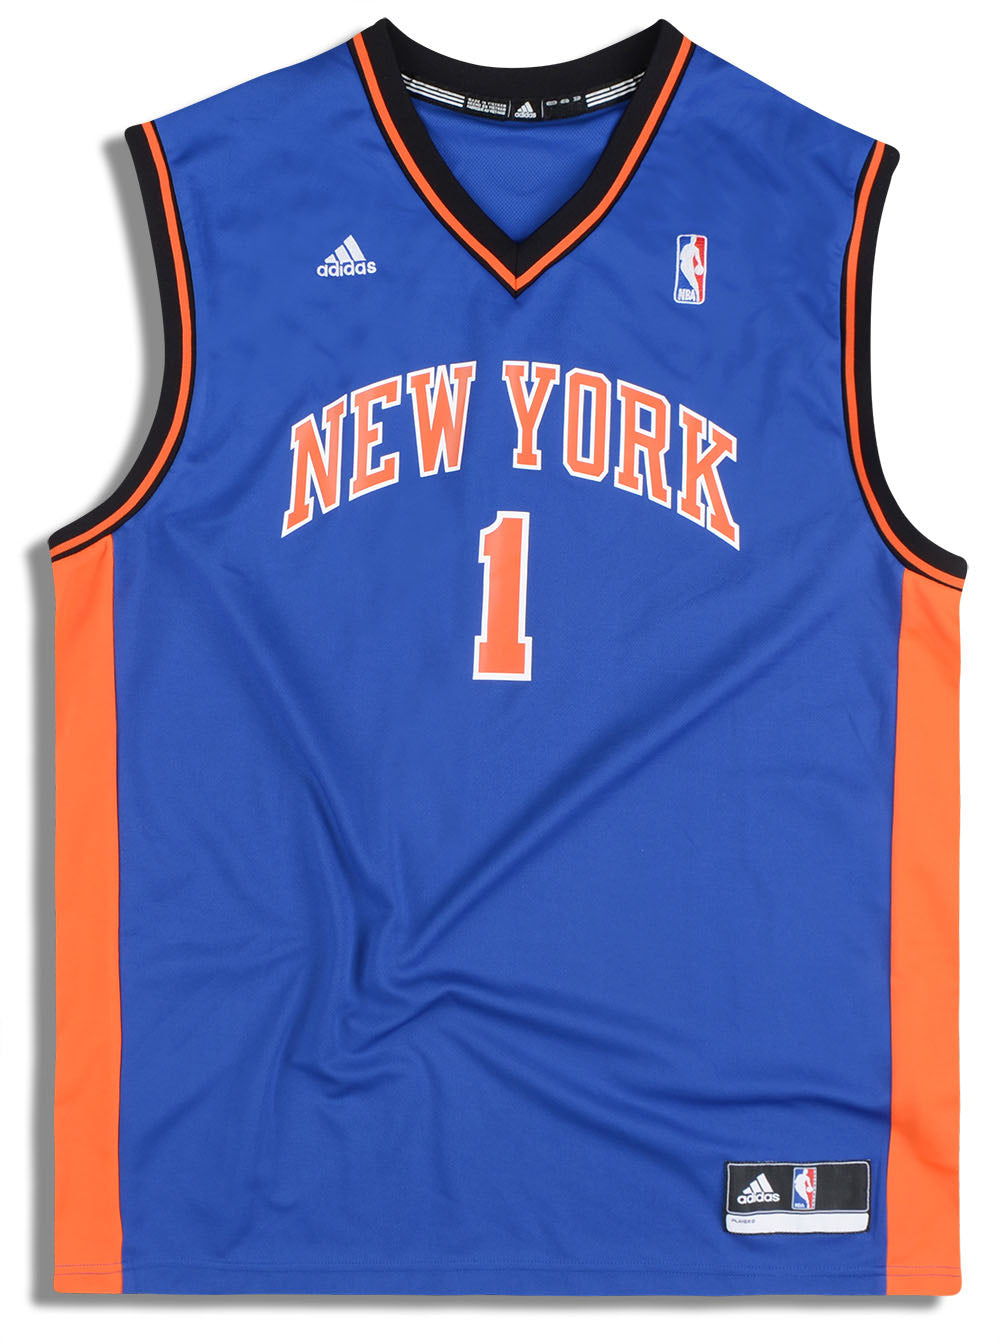 Site🗽🏀 on X: Knicks jersey concept 🔥 or 🗑️?